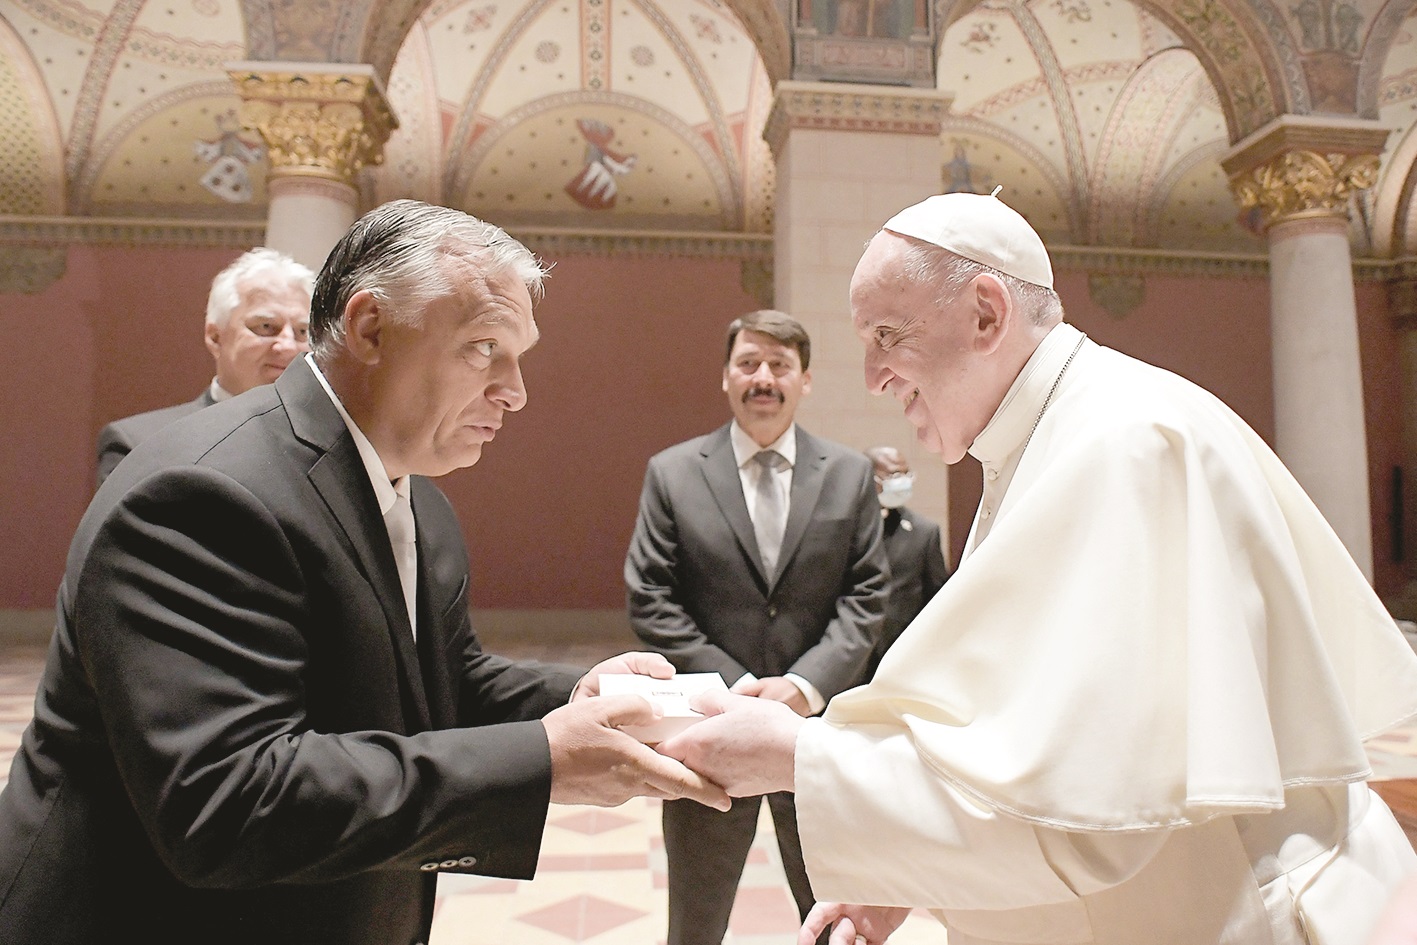 Hungary’s Orban and the Pope: Diverging views of Christianity